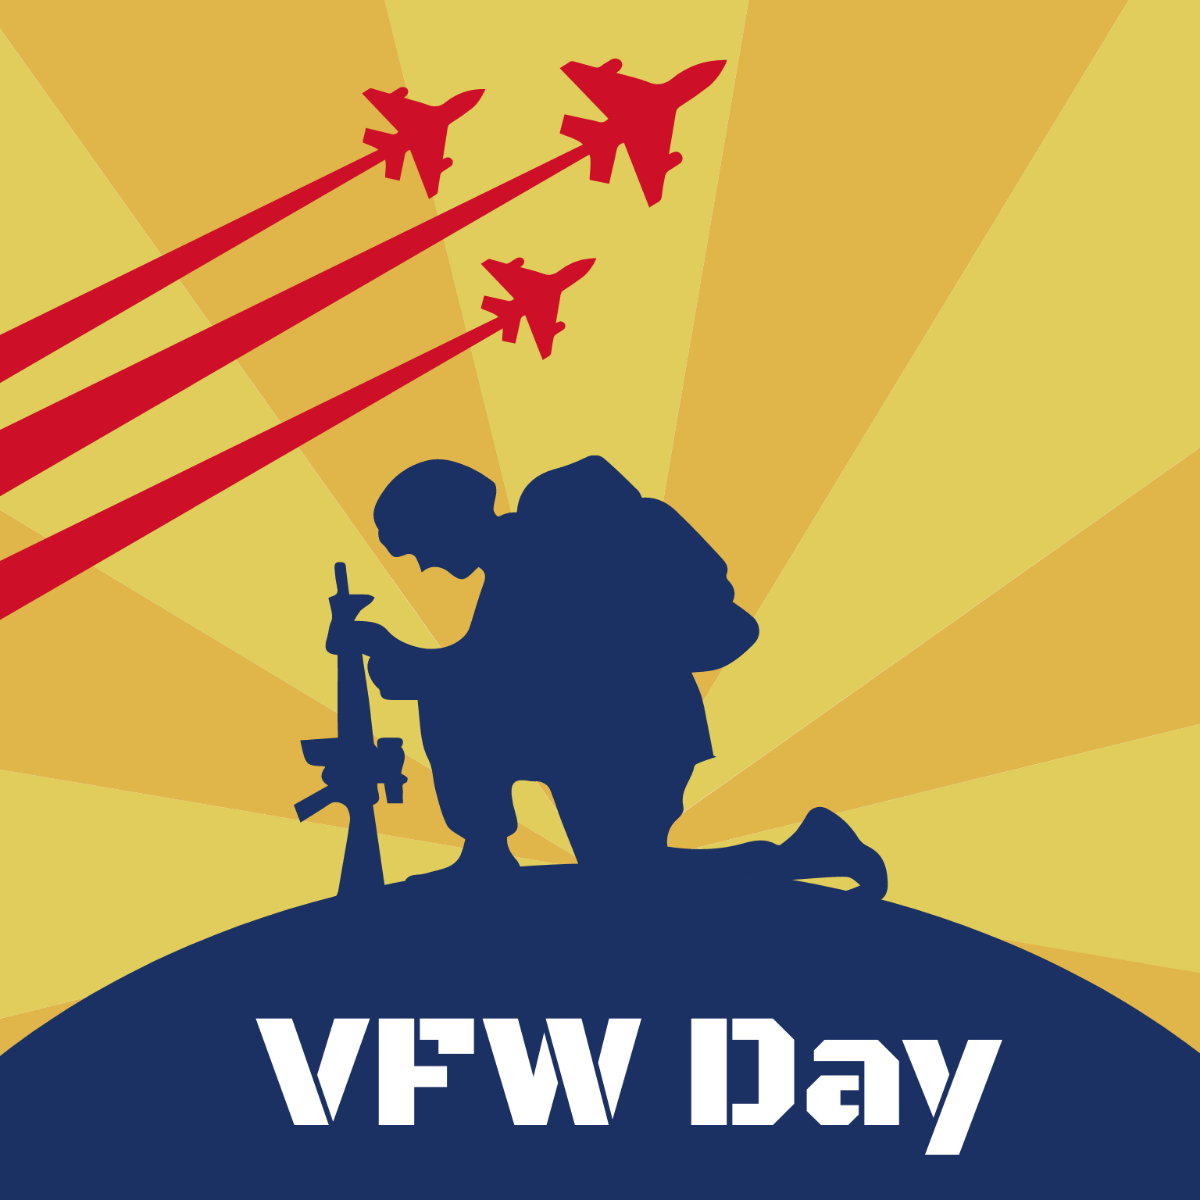 Happy VFW Day Illustration Template